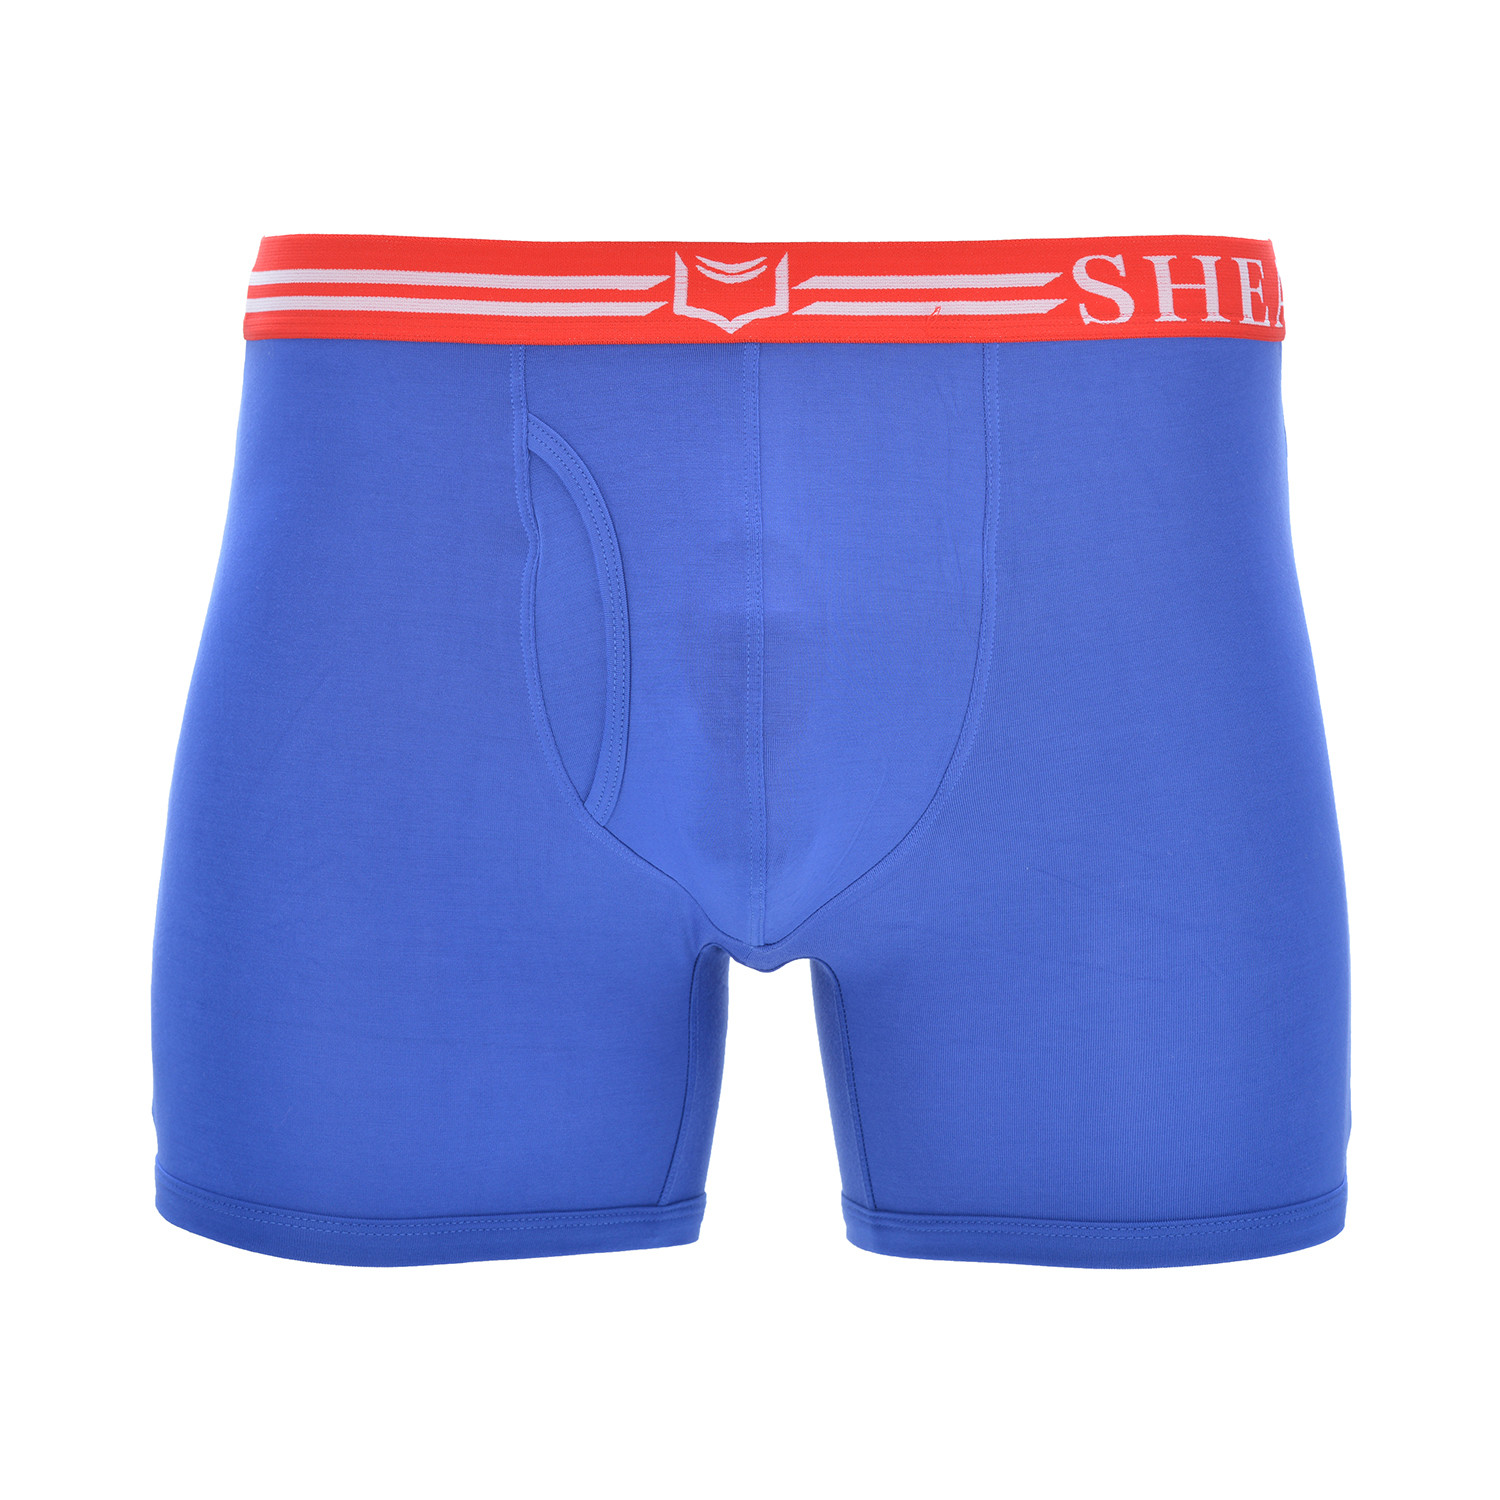 SHEATH 4.0 Men's Dual Pouch Boxer Brief // Red, White + Blue (Large) -  Sheath Underwear - Touch of Modern